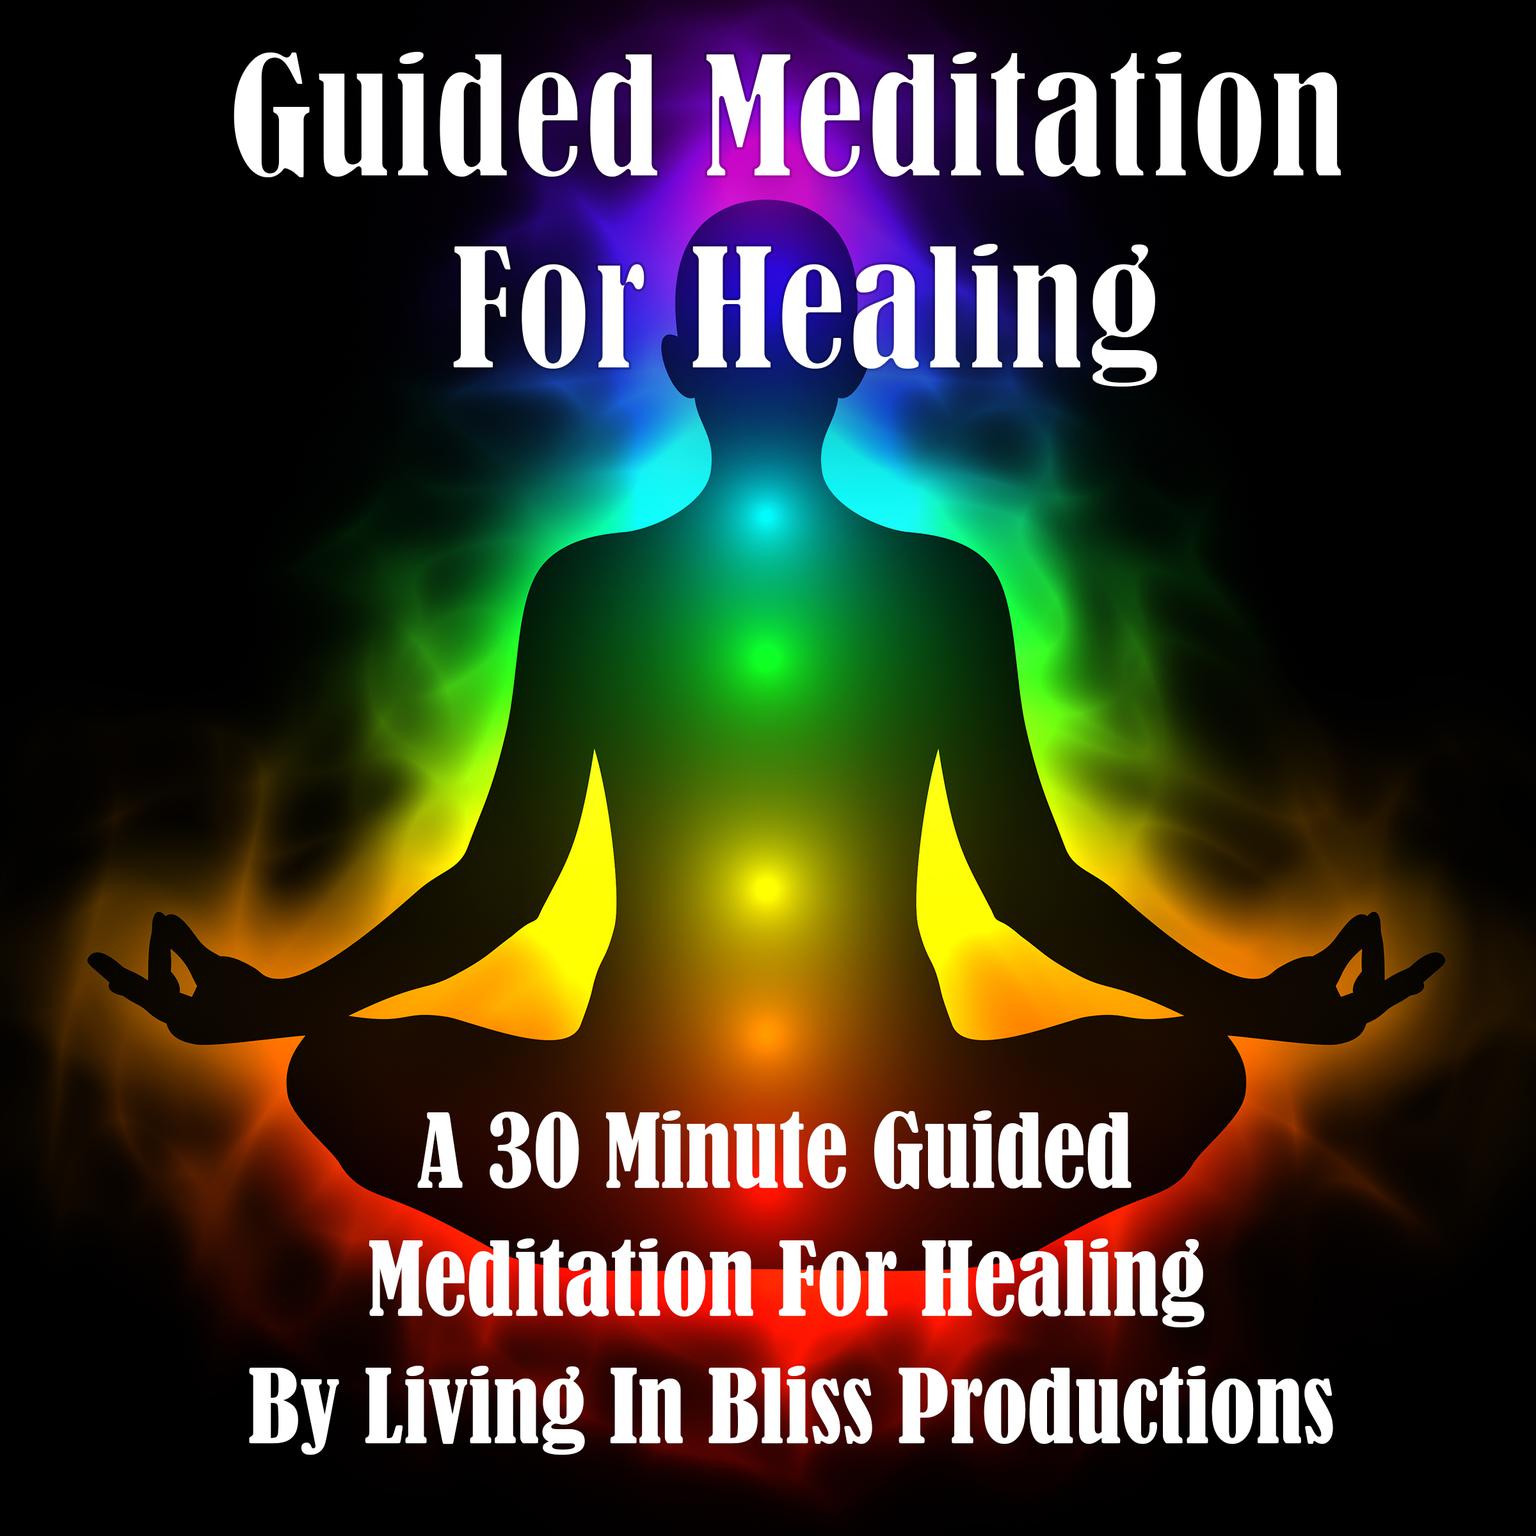 Guided Meditation For Healing: A 30 Minute Guided Meditation For Healing: A 30 Minute Guided Meditation For Healing Audiobook, by Living In Bliss Productions